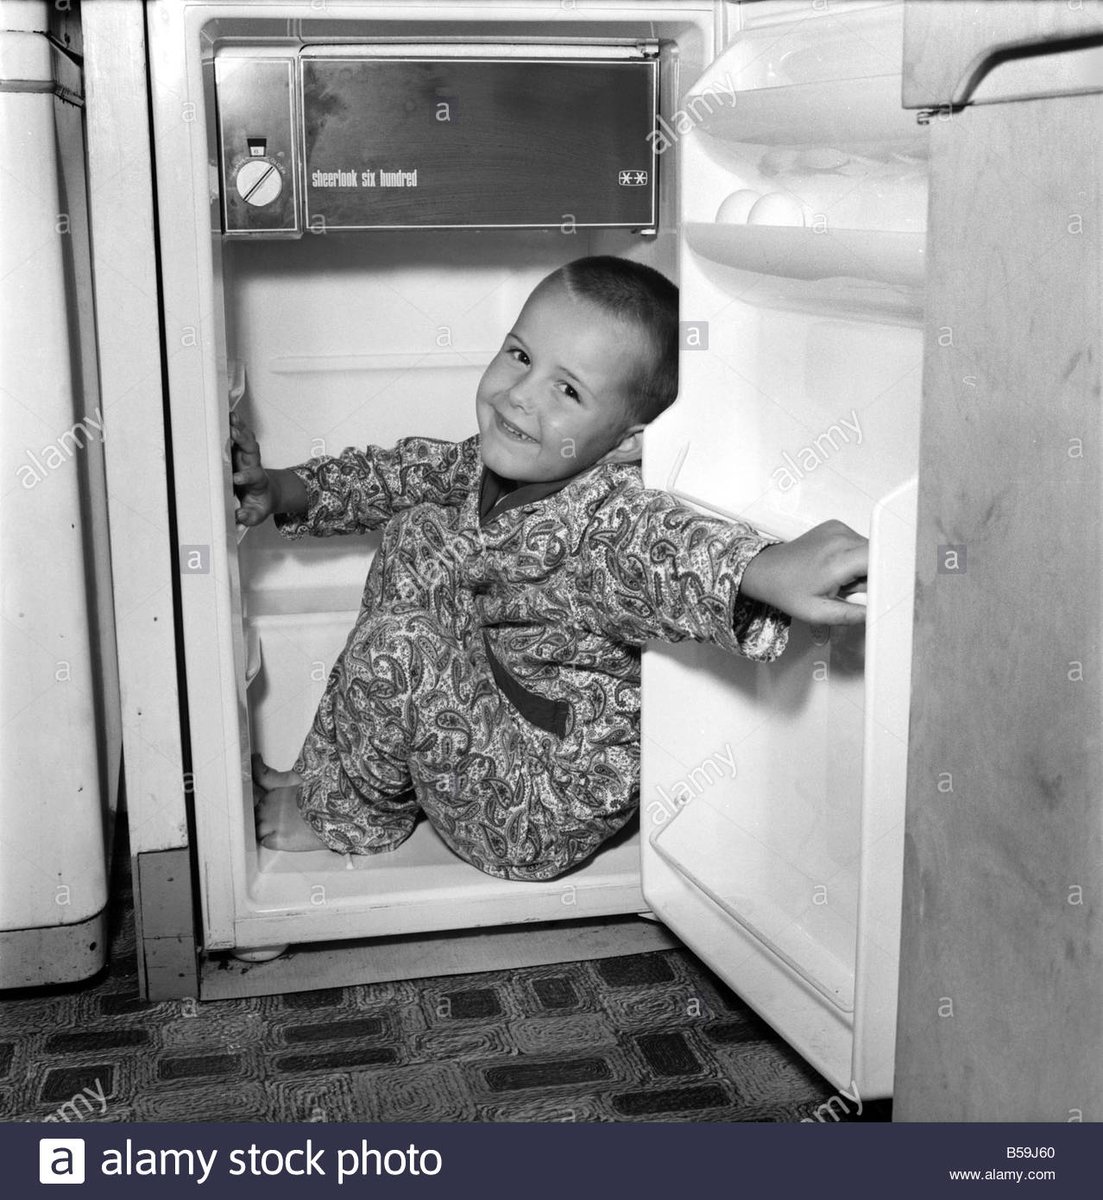 Number 38Getting trapped in an abandoned fridge. Worse than quicksand.